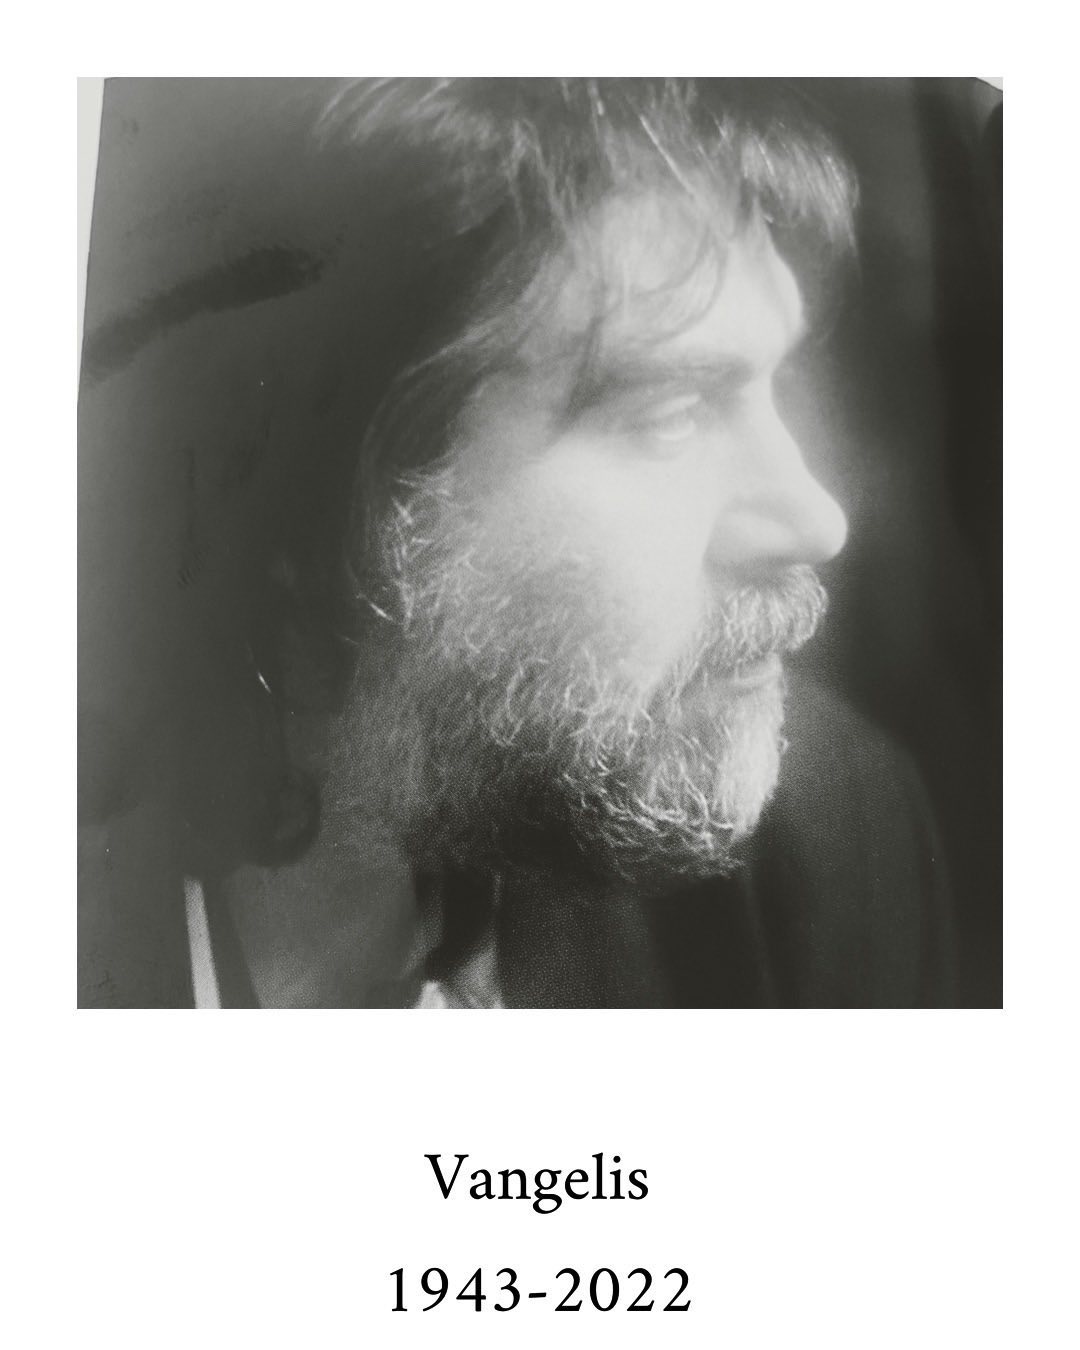 R.I.P Vangelis. A legendary composer extraordinaire and a huge exponent of electronic music will be missed by many.
His use of synthesizers was one of my first love affairs with that synthesized world of sonic expression.
#vangelis #bladedunner #yamahacs80 #composer #electronicmusic #synthsizer #filmscore #ambient #recording